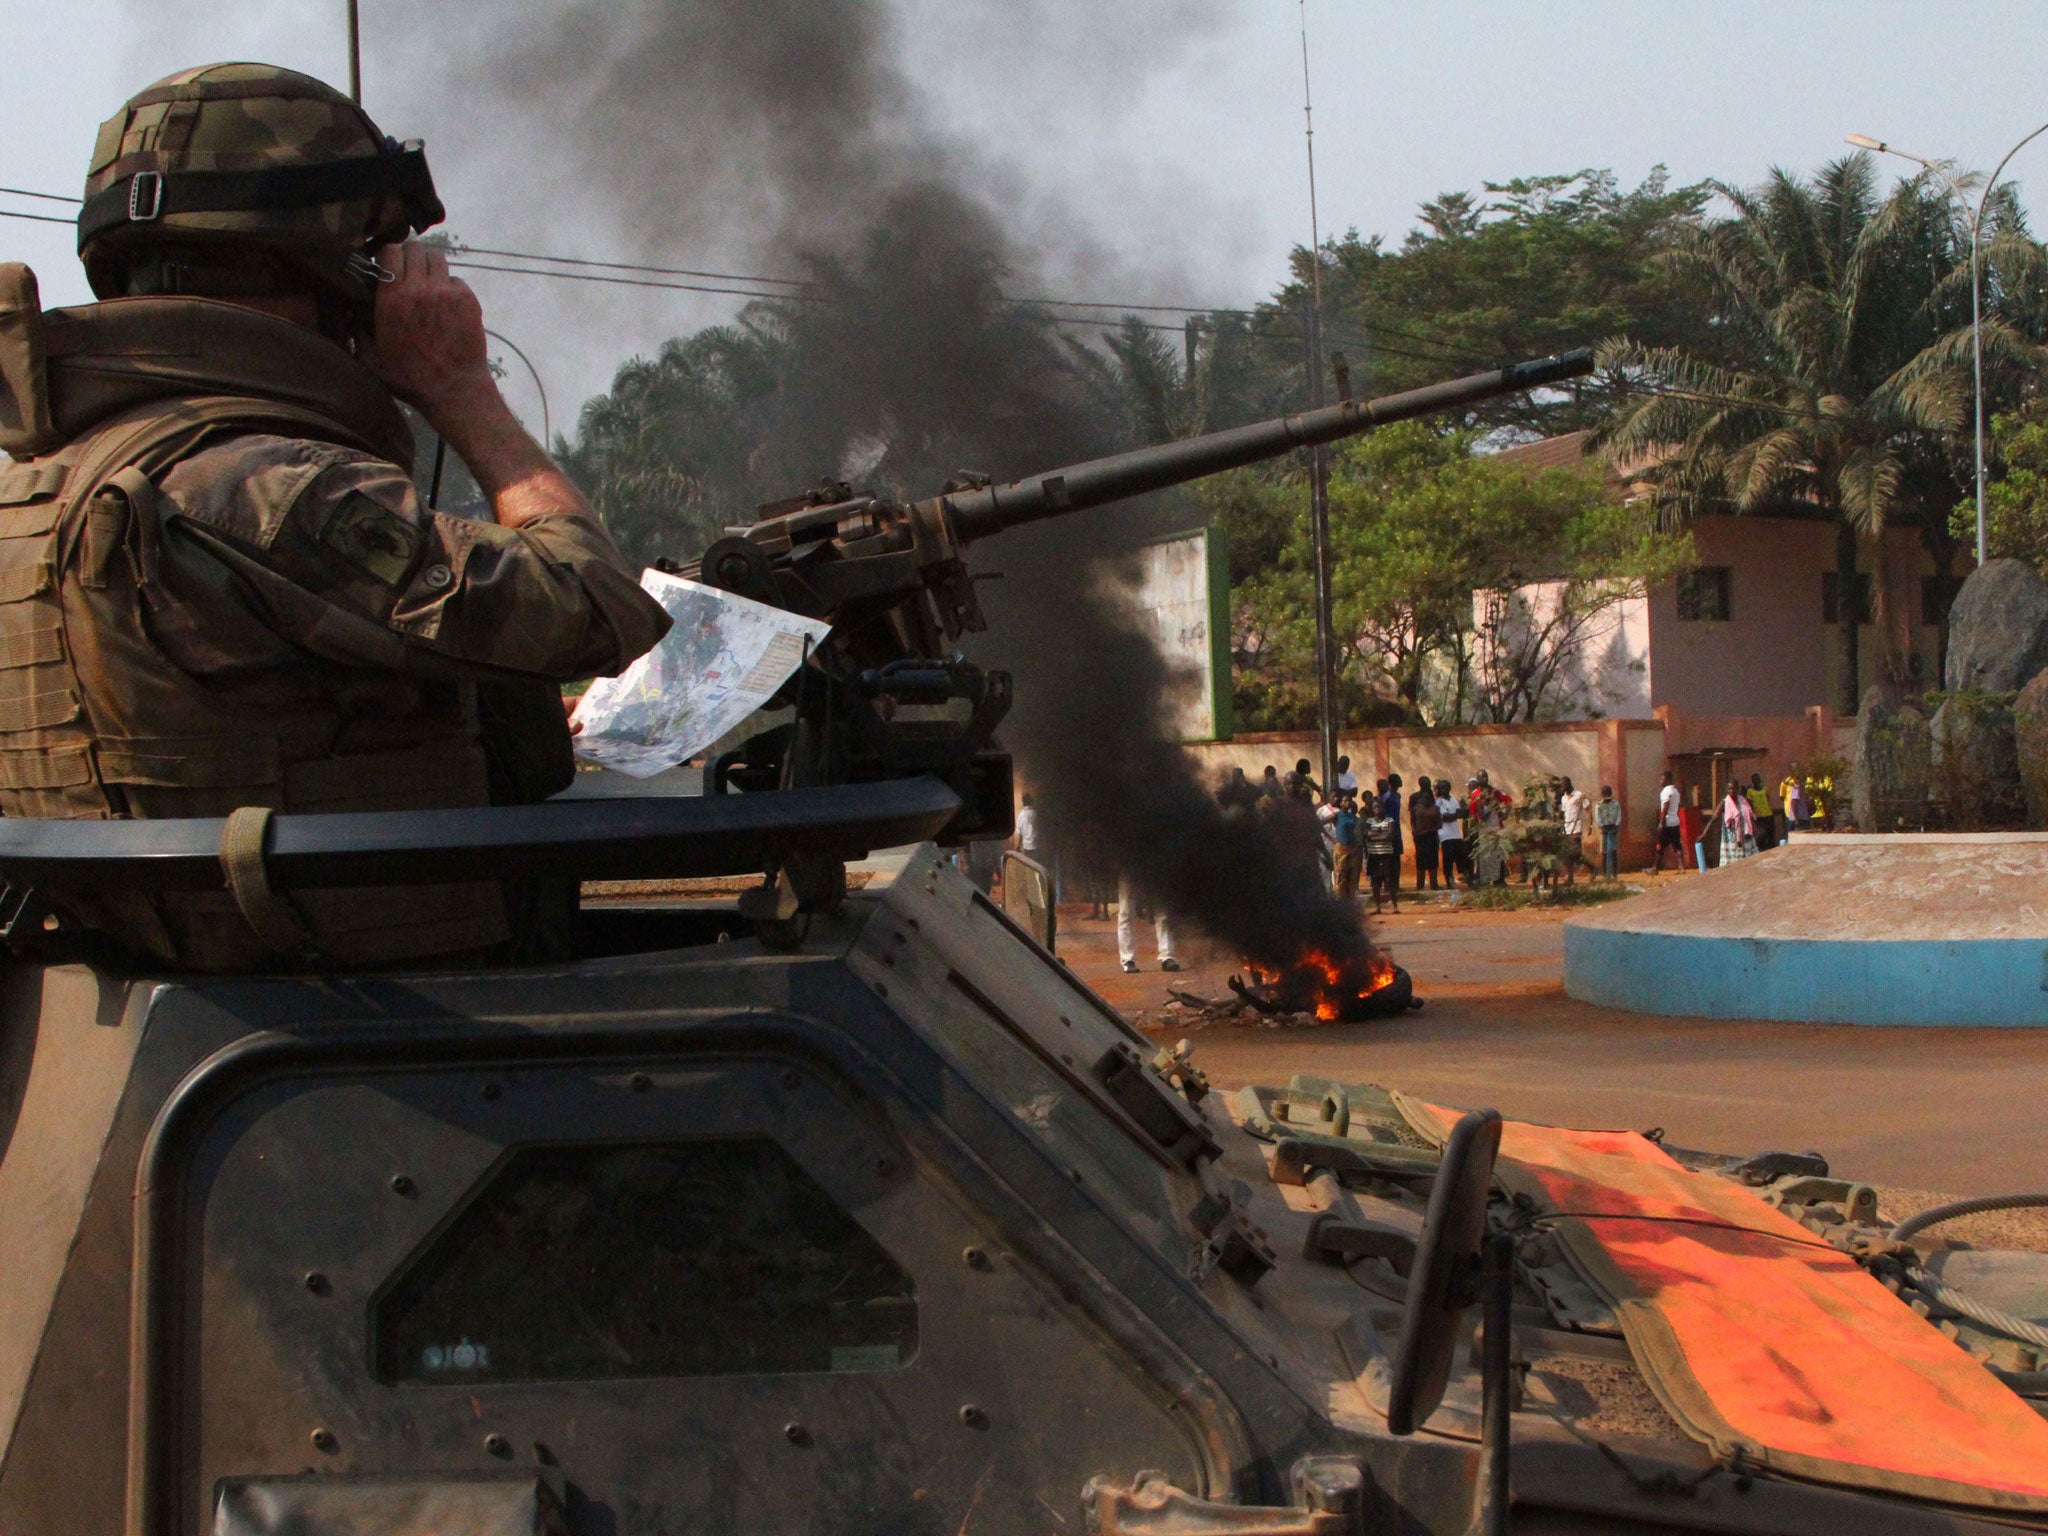 A French soldier looks on as the body of a lynched Muslim man is burned by a crowd, in Bangui.